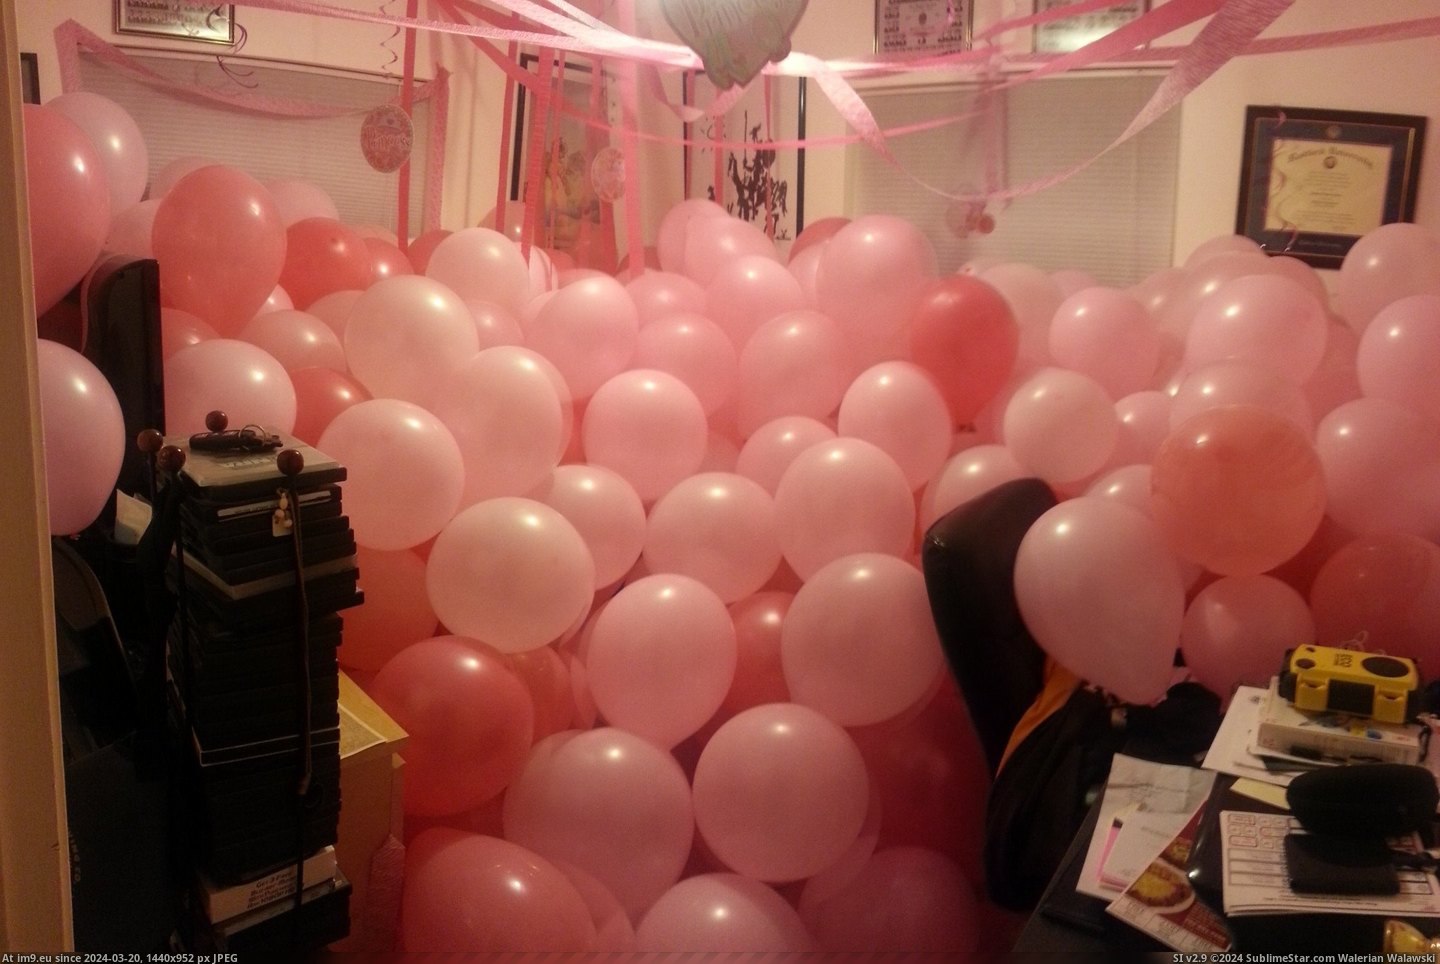 #Funny #One #Out #Roommate #Balloons #Revenge #Room #Got #Town [Funny] My roommate went out of town and came back to 400 balloons in his room. He recently got his revenge when the other one l Pic. (Изображение из альбом My r/FUNNY favs))